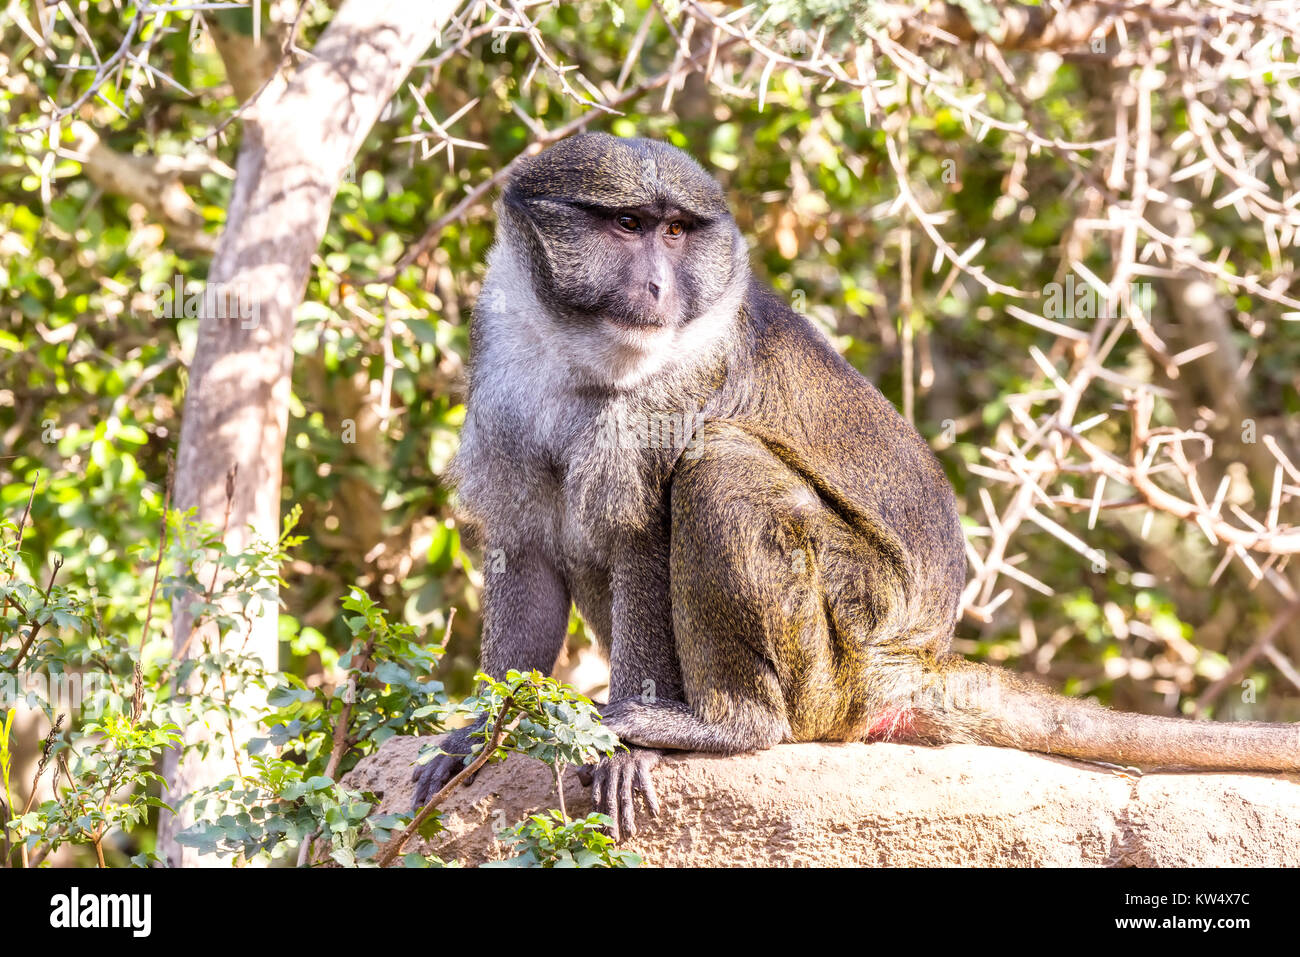 A wild Allen Swamp Monkey rests on a rock during a hot, sunny day Stock Photo